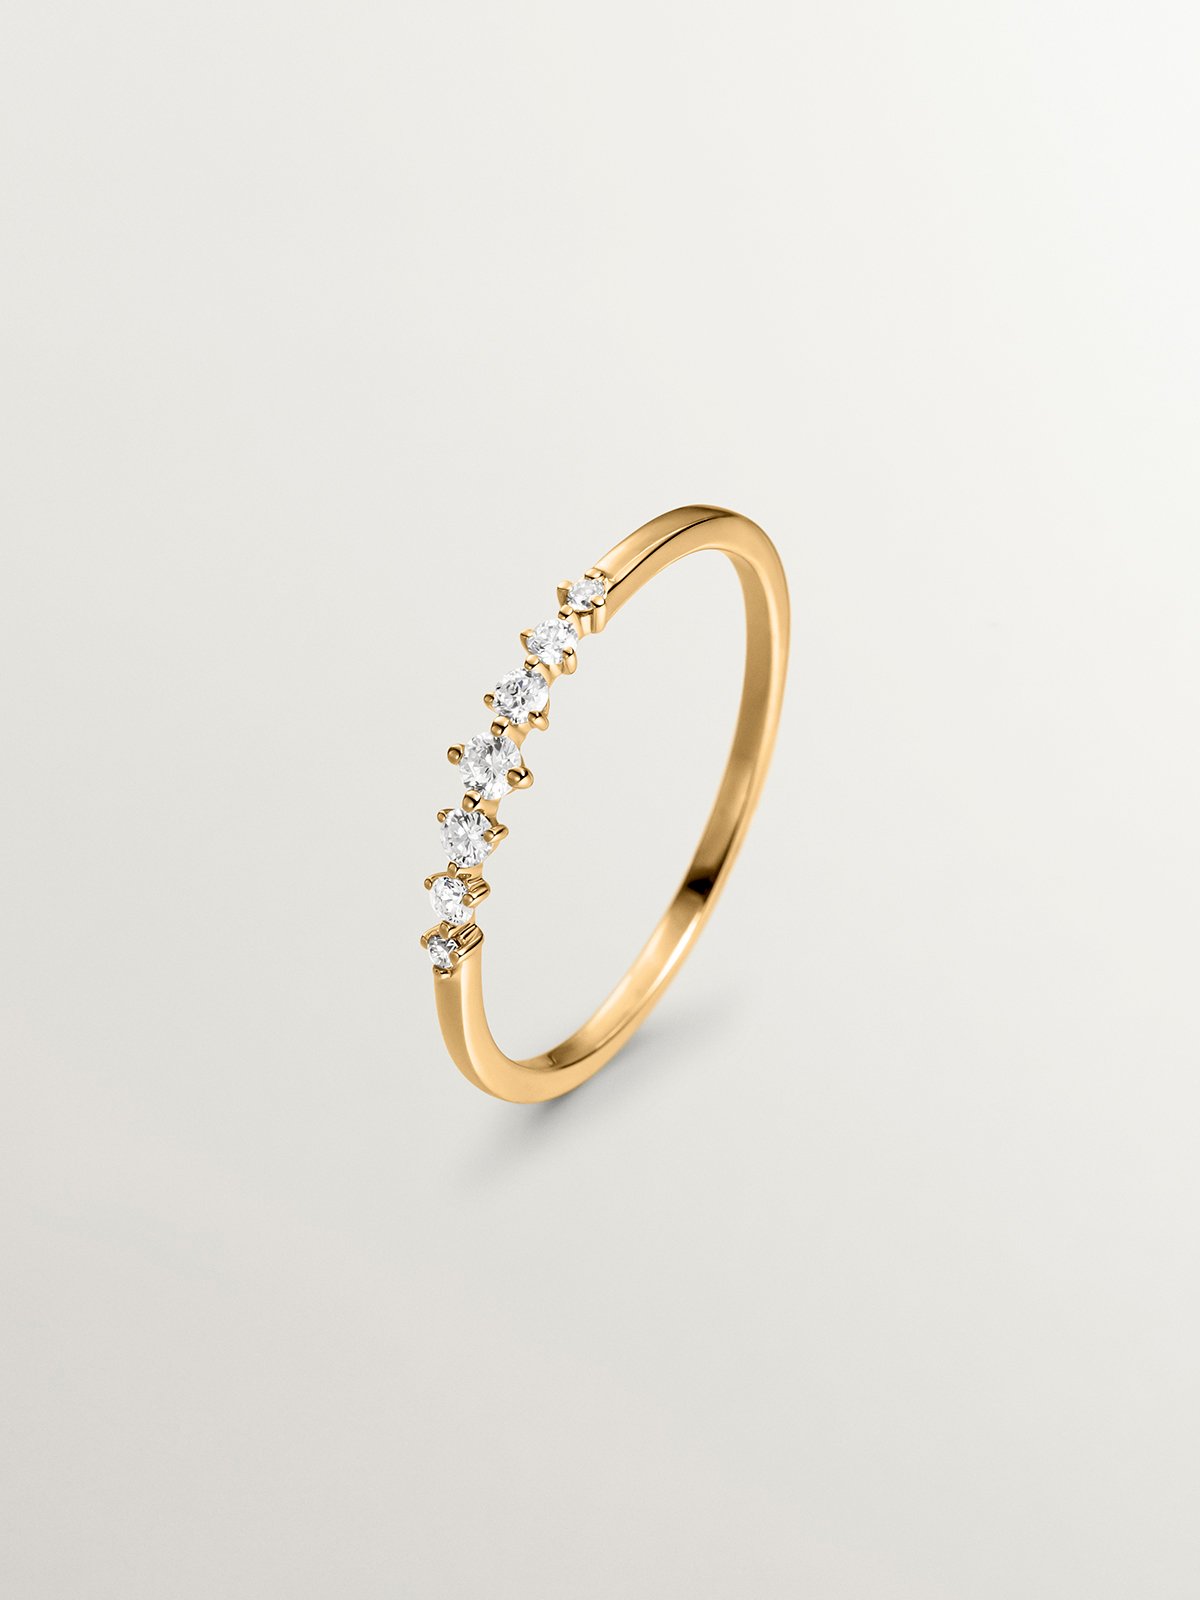 18K yellow gold ring with brilliant cut diamonds